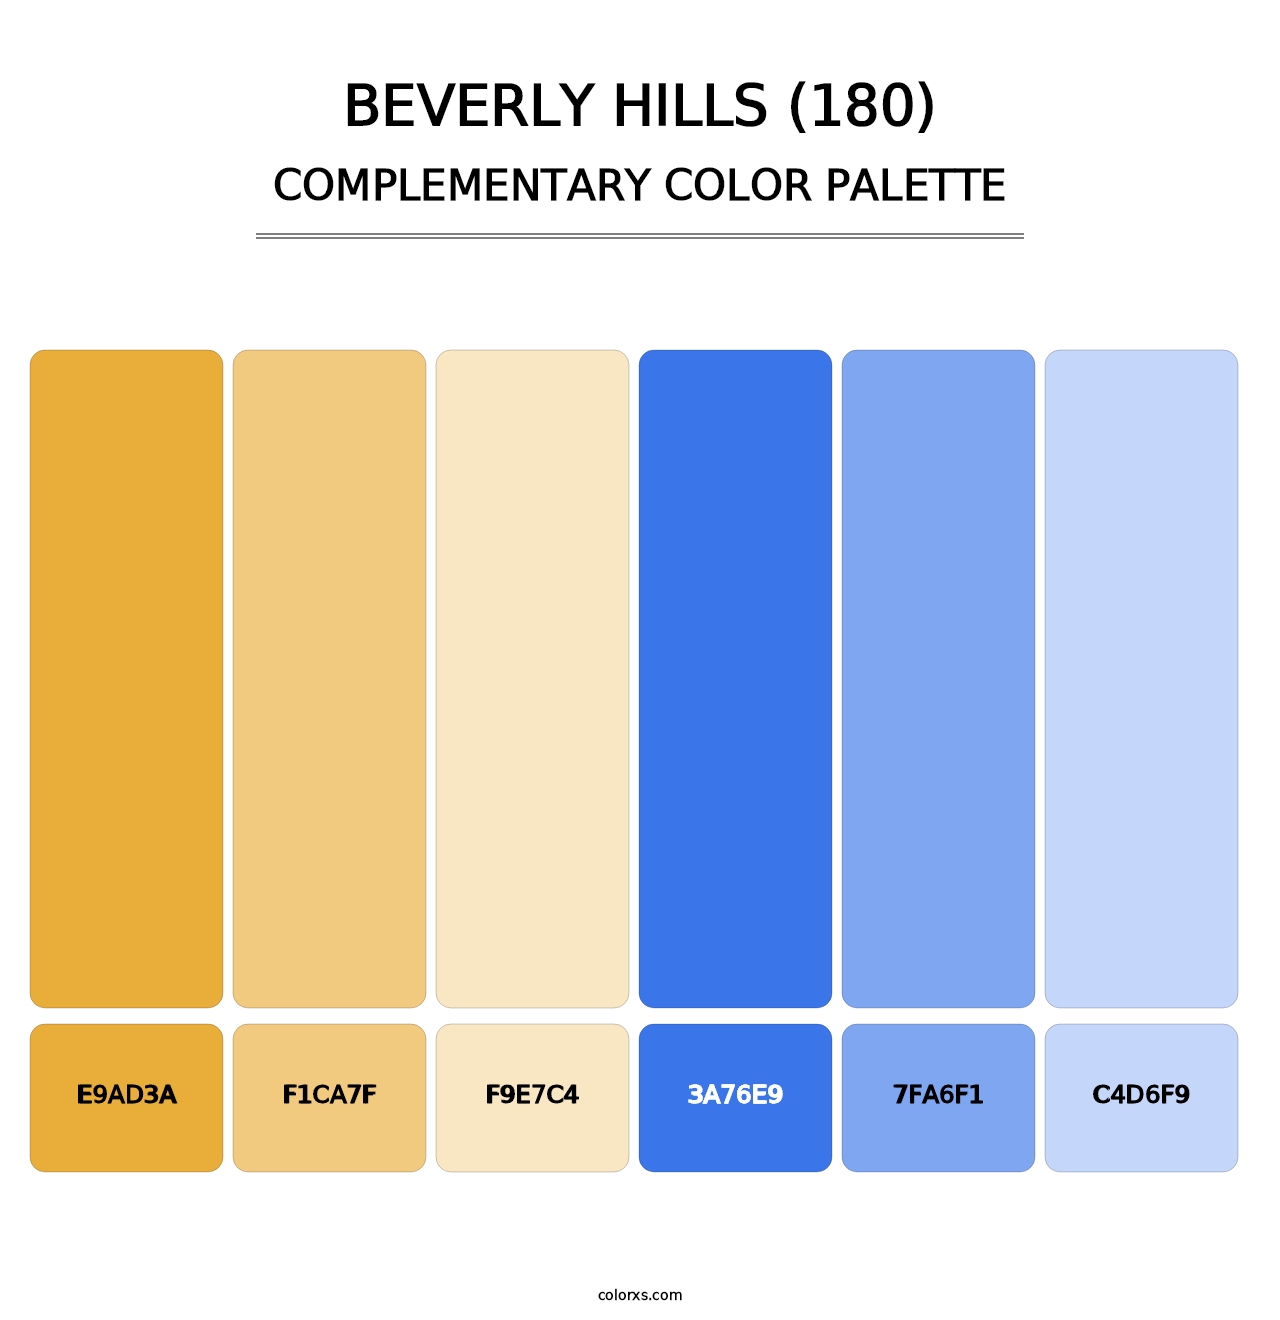 Beverly Hills (180) - Complementary Color Palette